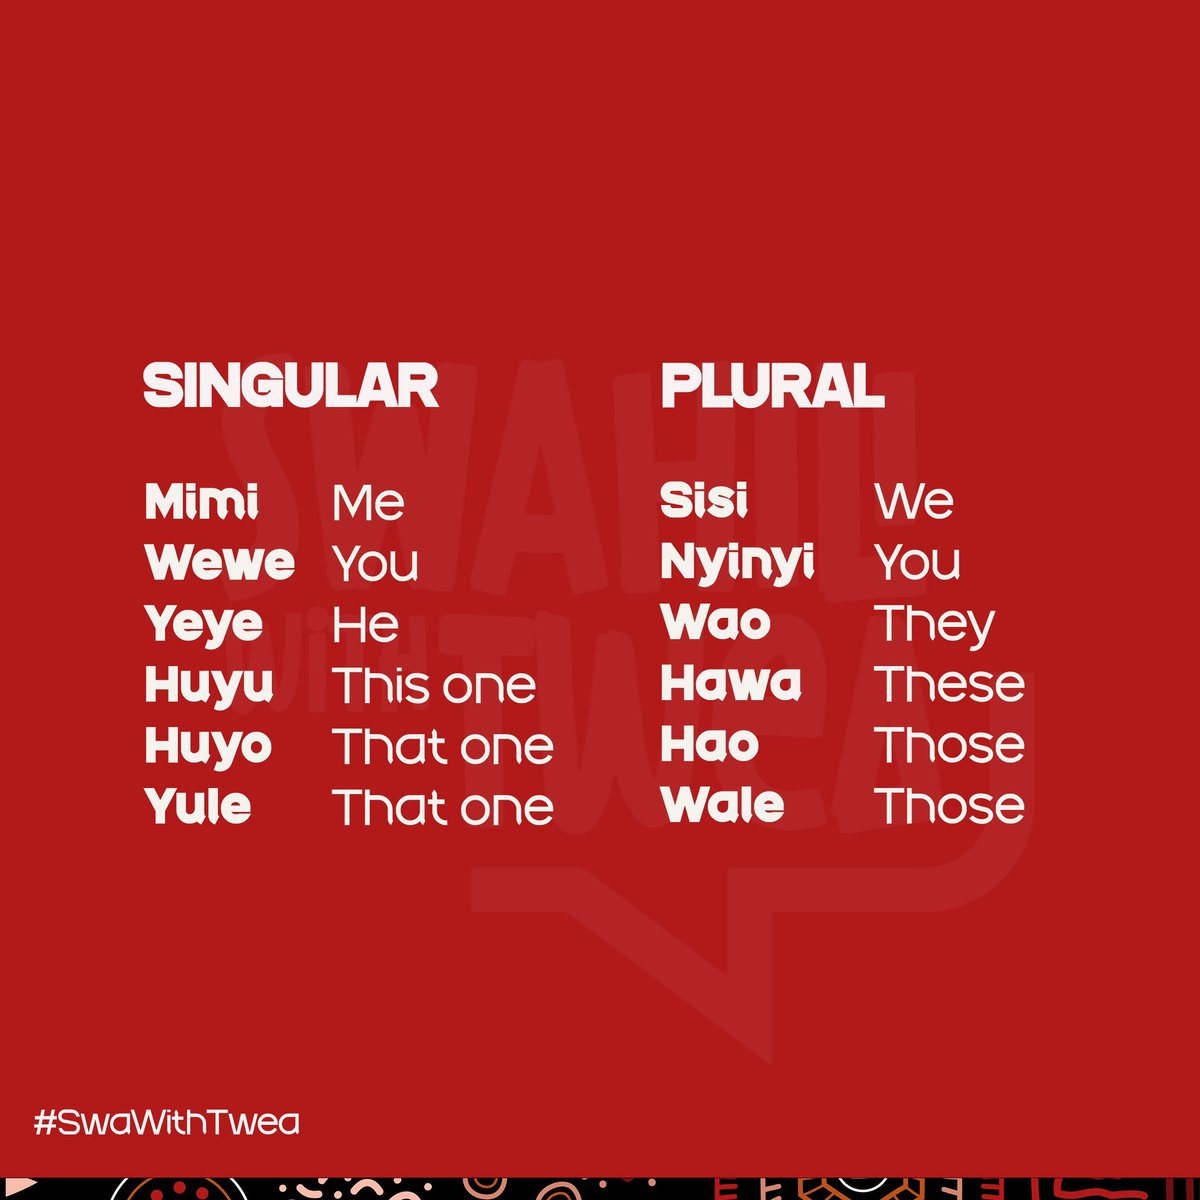 Hamjambo 
Some #Swahili personal pronouns 
Pronouns for the 3rd person illustrates the physical distance btn the speaker & the listener.
🔸”Huyo” means the subject is closer to the listener 
🔸”Yule” is used when the subject is far form both the speaker & listener 
#SwaWithTwea